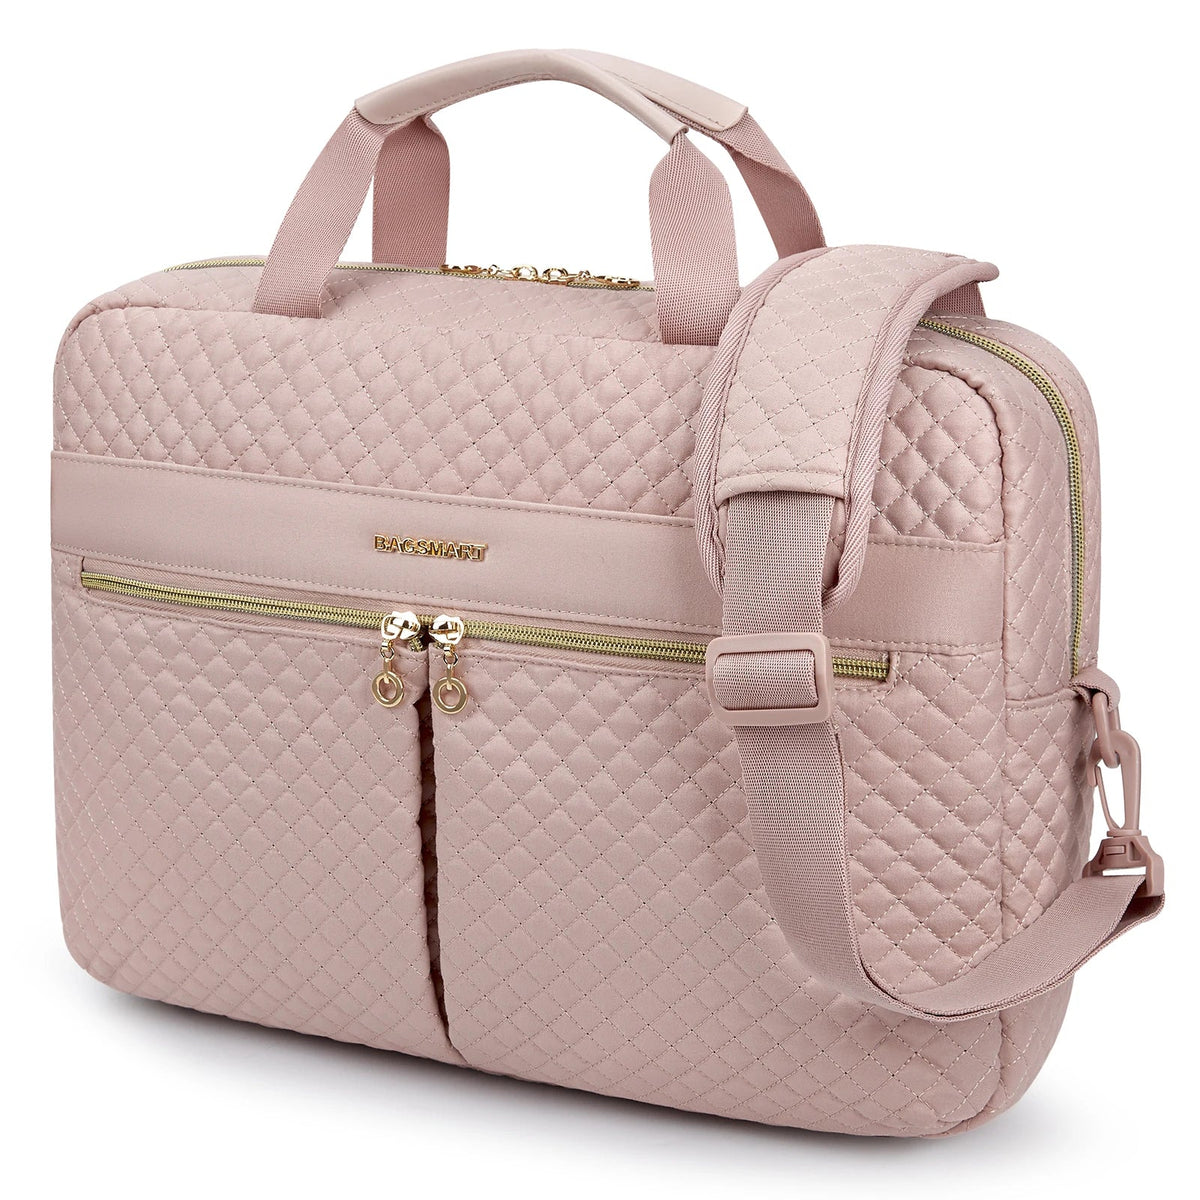 15.6 Inch Laptop Briefcase Pink / 15.5inch laptop / CHINA